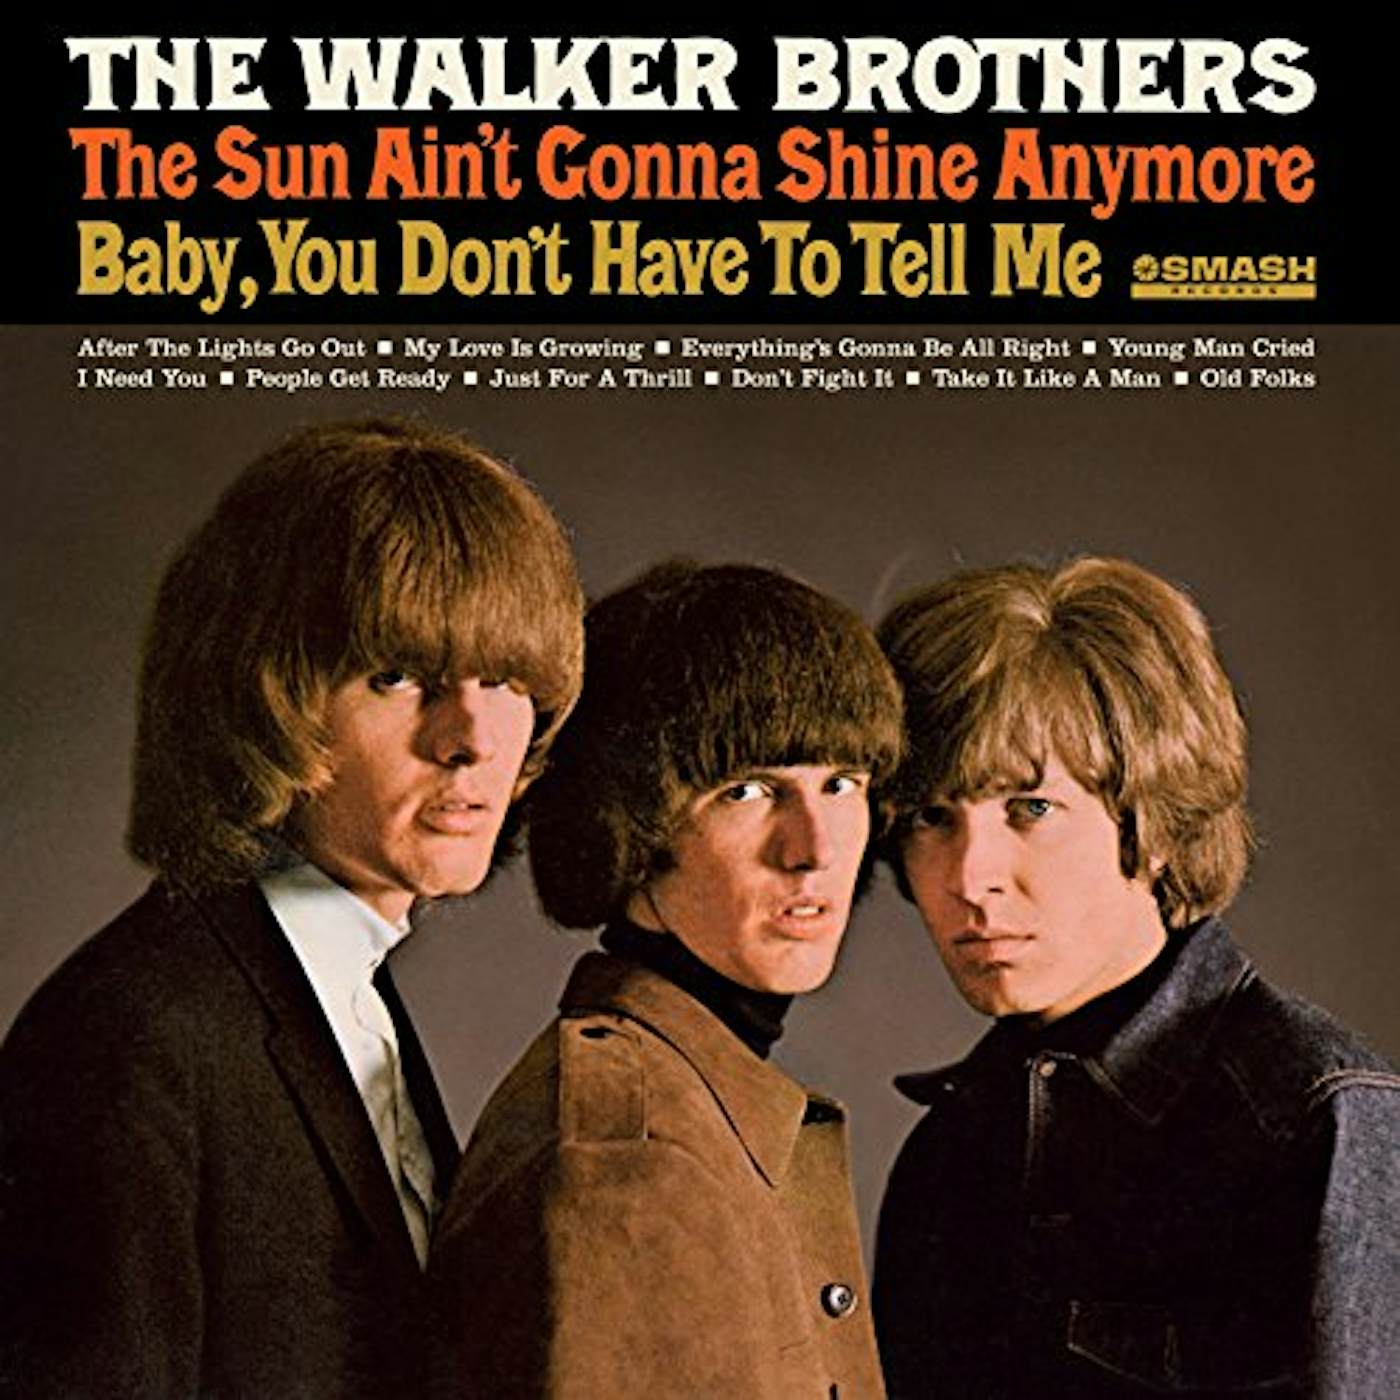 The Walker Brothers SUN AIN'T GONNA SHINE ANYMORE Vinyl Record